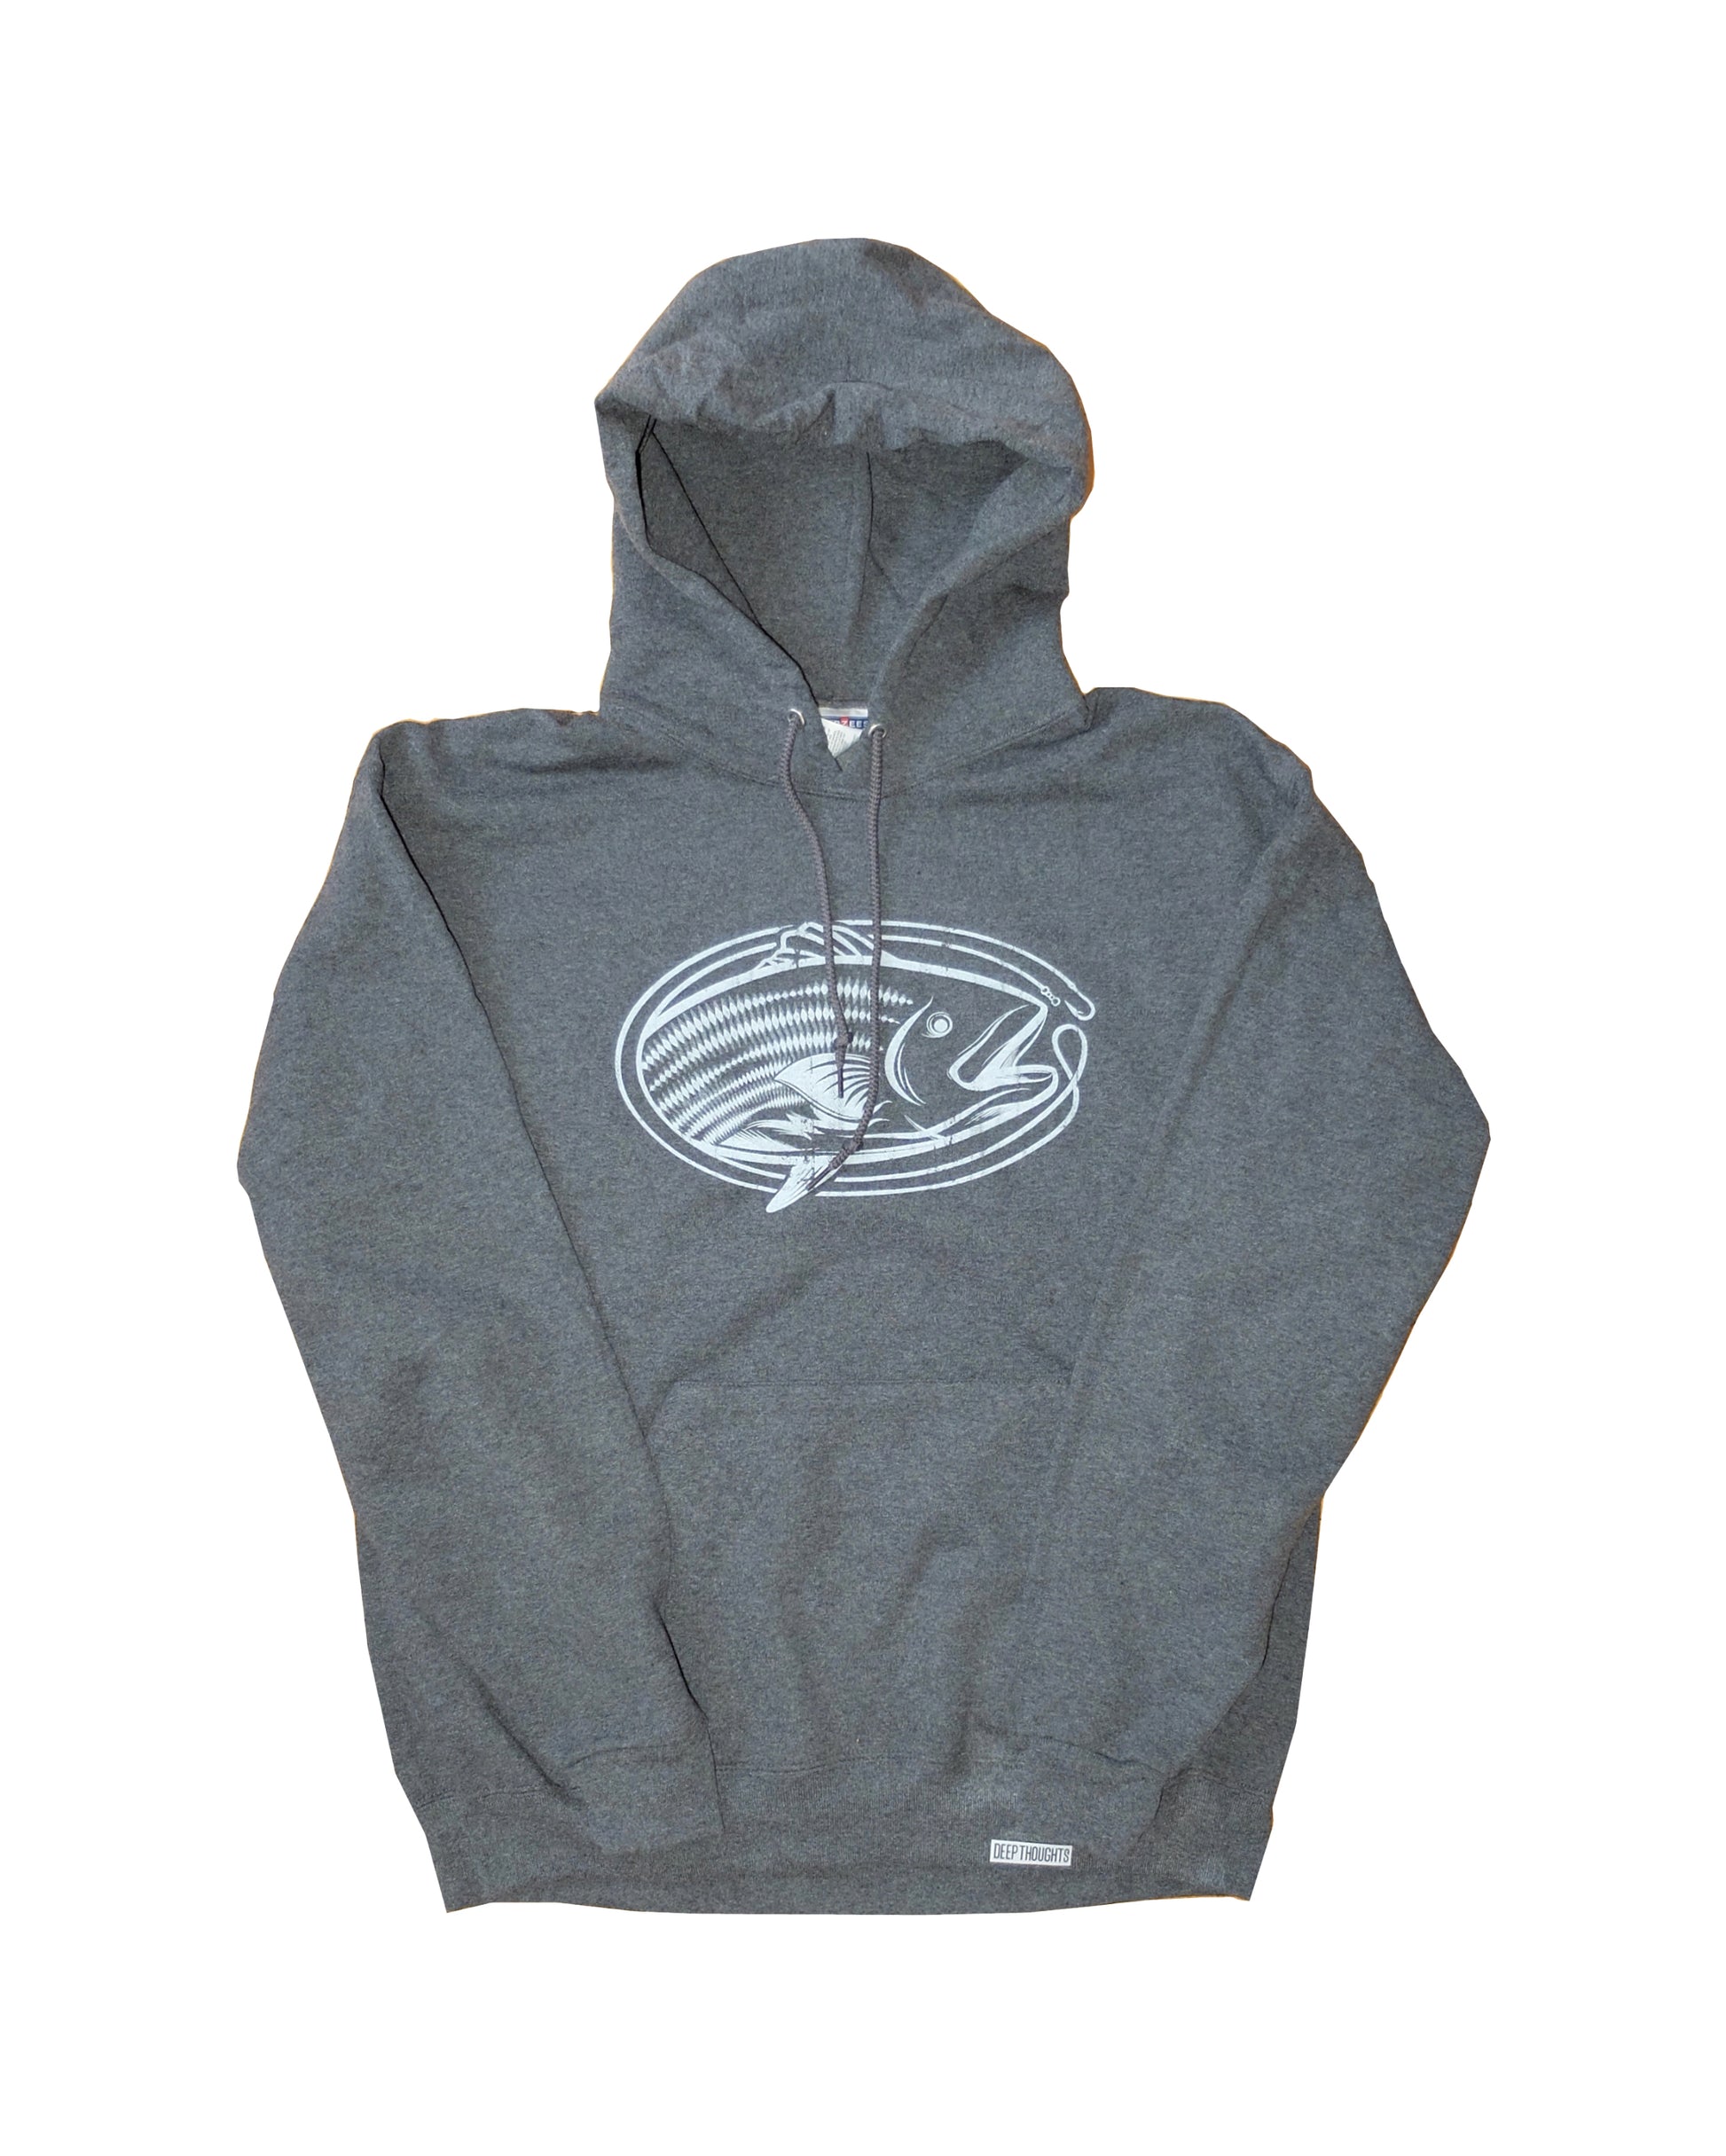 heather charcoal hoodie with white vintage style oval-shaped striped bass fishing graphic